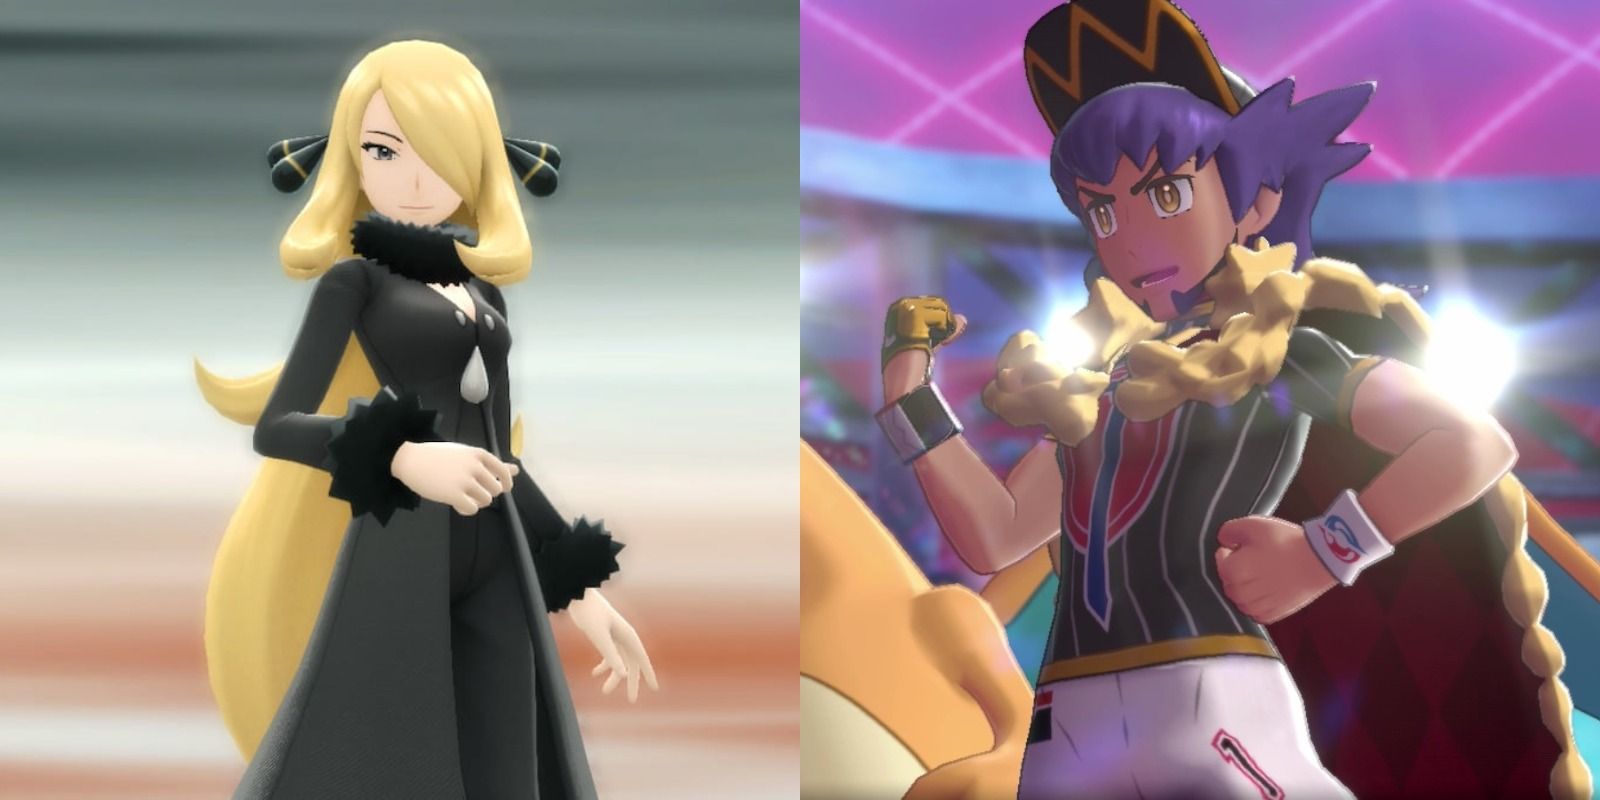 Split image of Cynthia in a black dress and Leon fist pumping in an arena from the Pokemon franchise